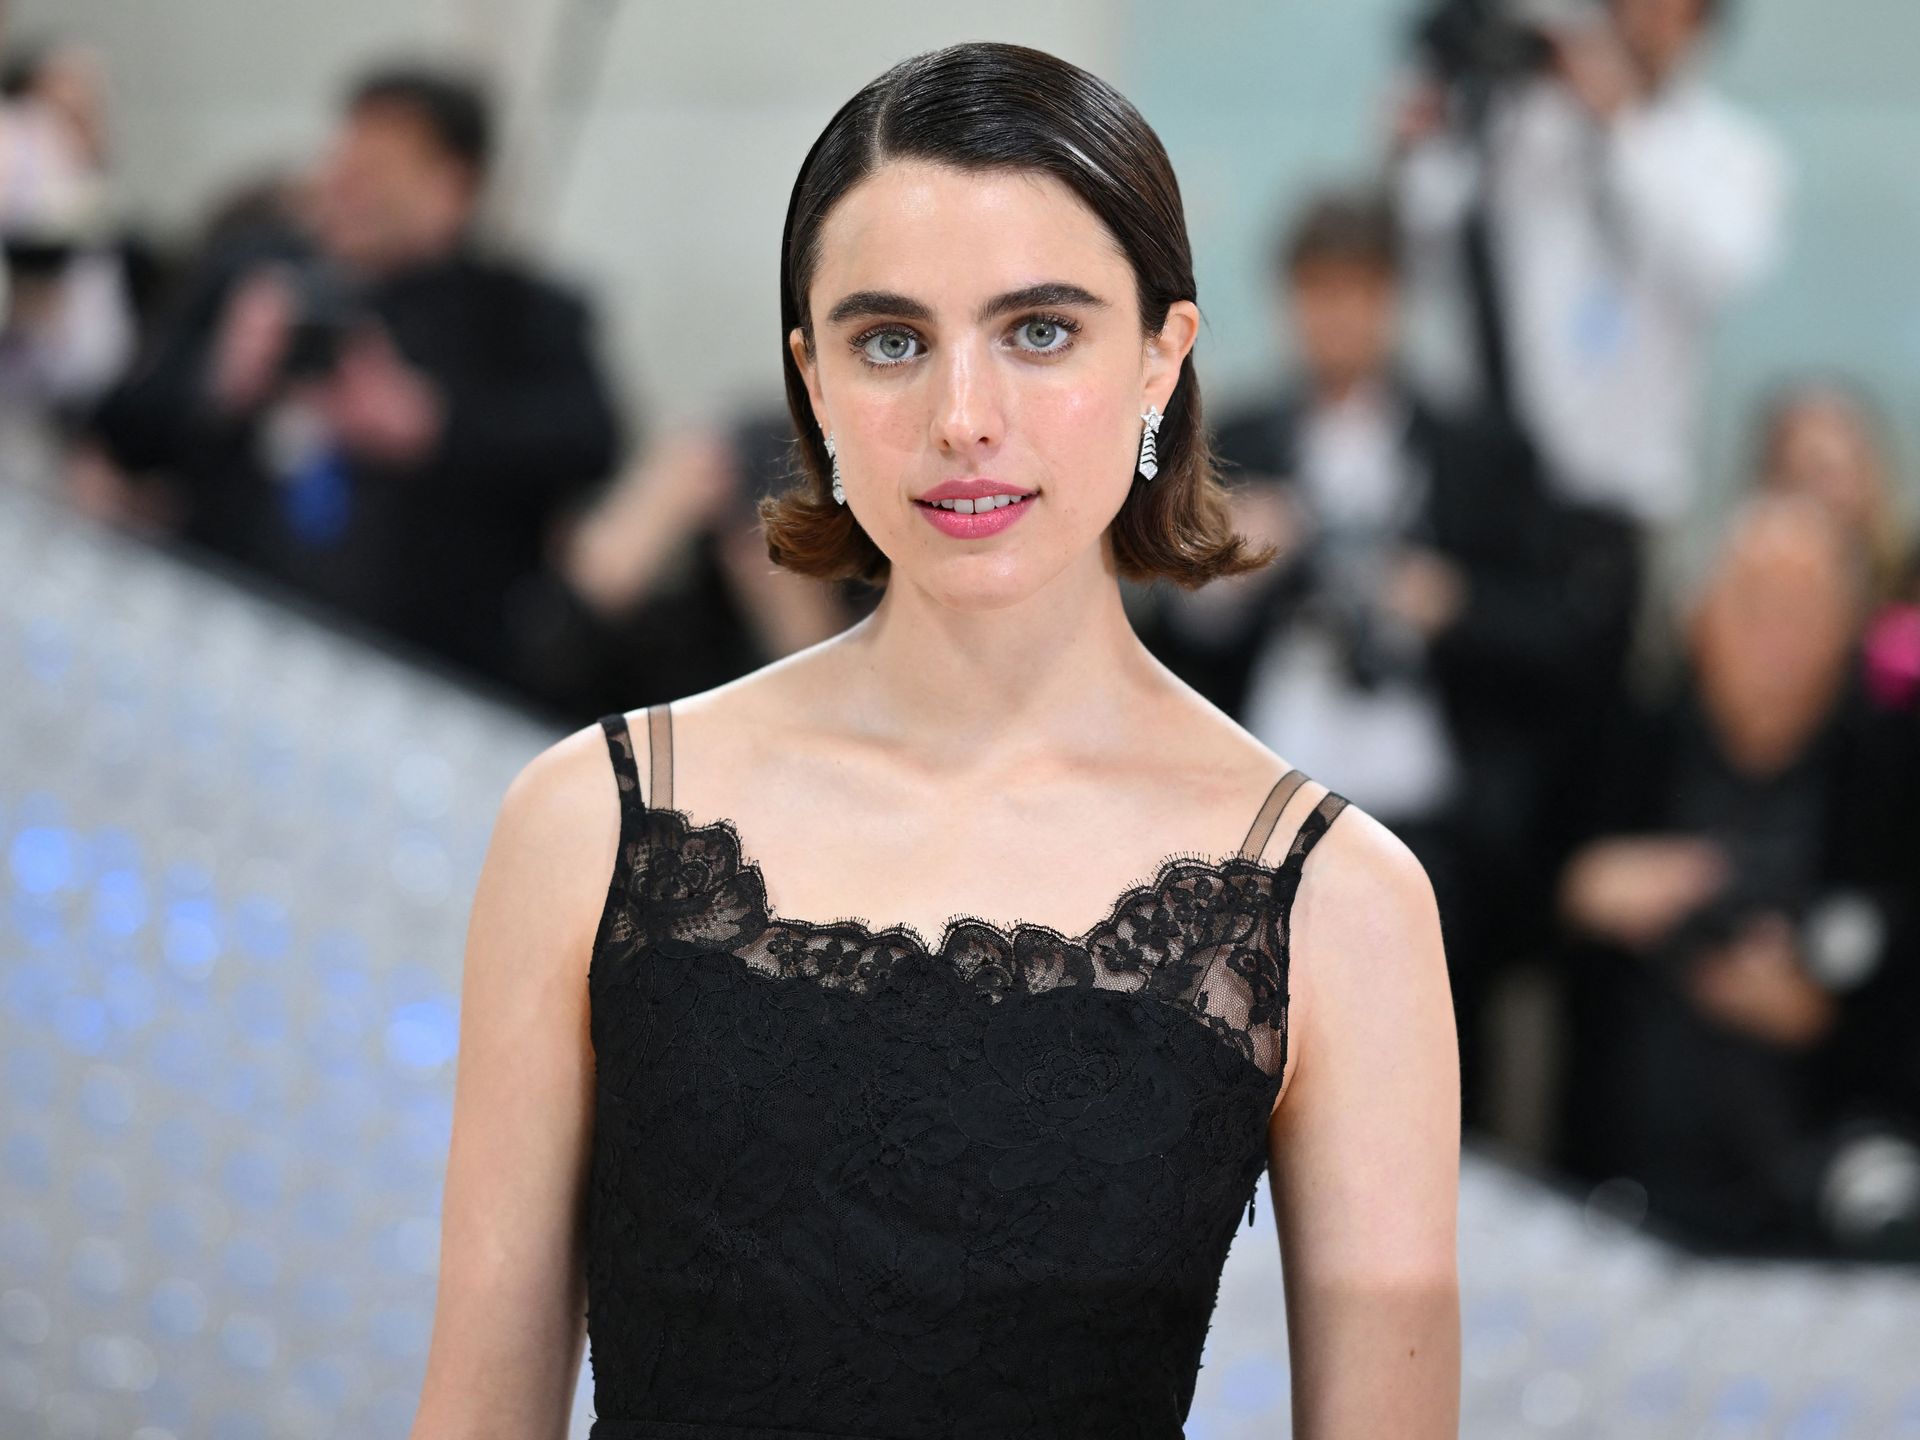 Nepo baby' Margaret Qualley shows off $100k engagement ring with